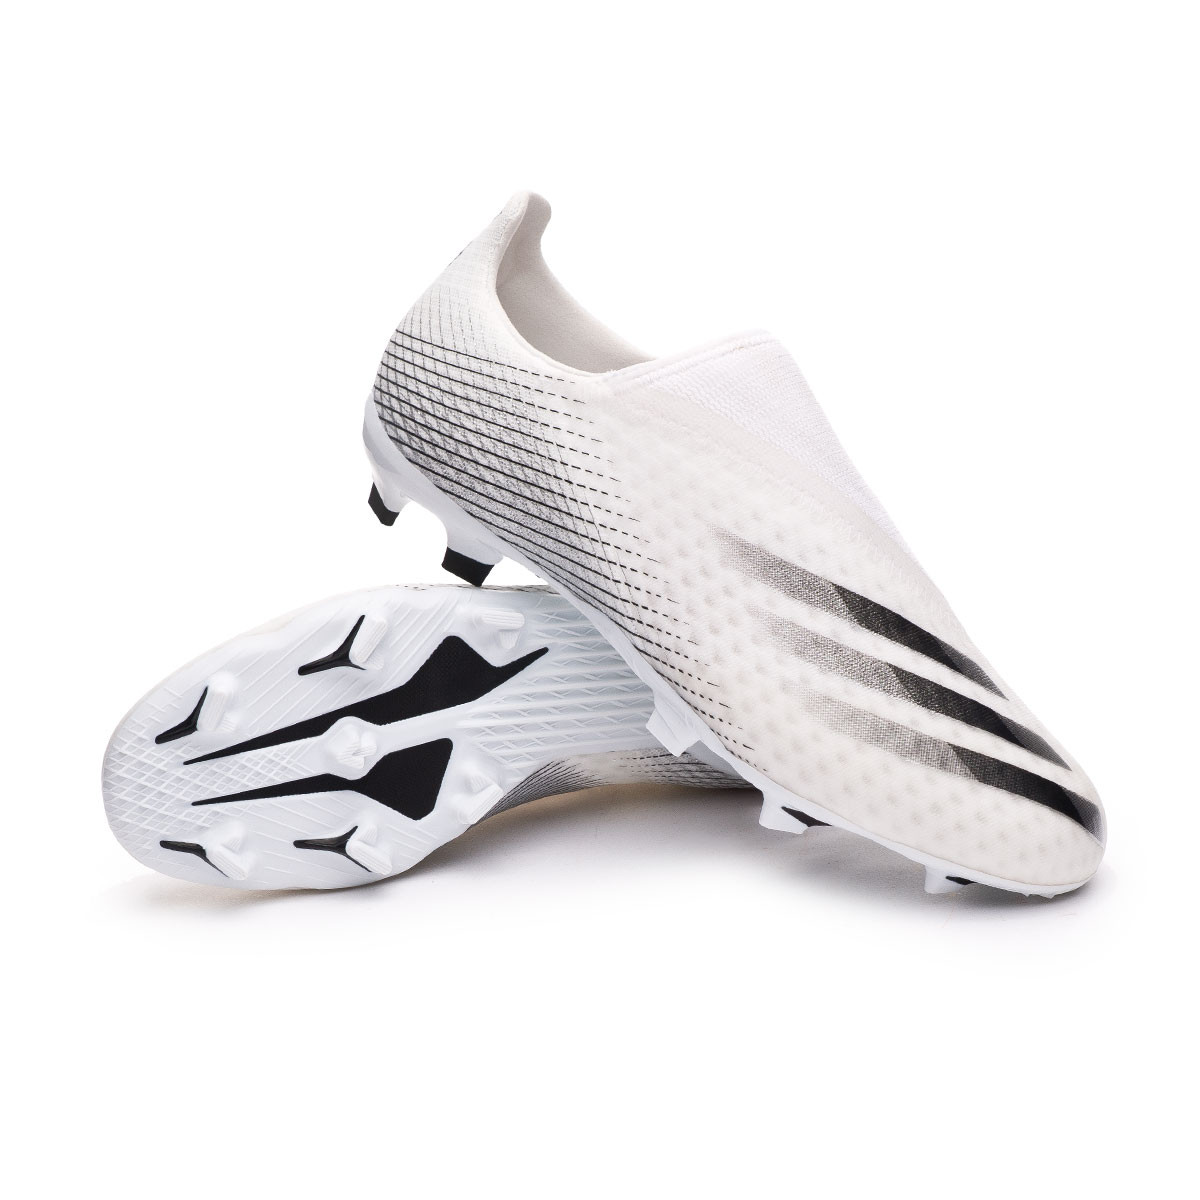 Football Boots adidas X Ghosted.3 LL FG 